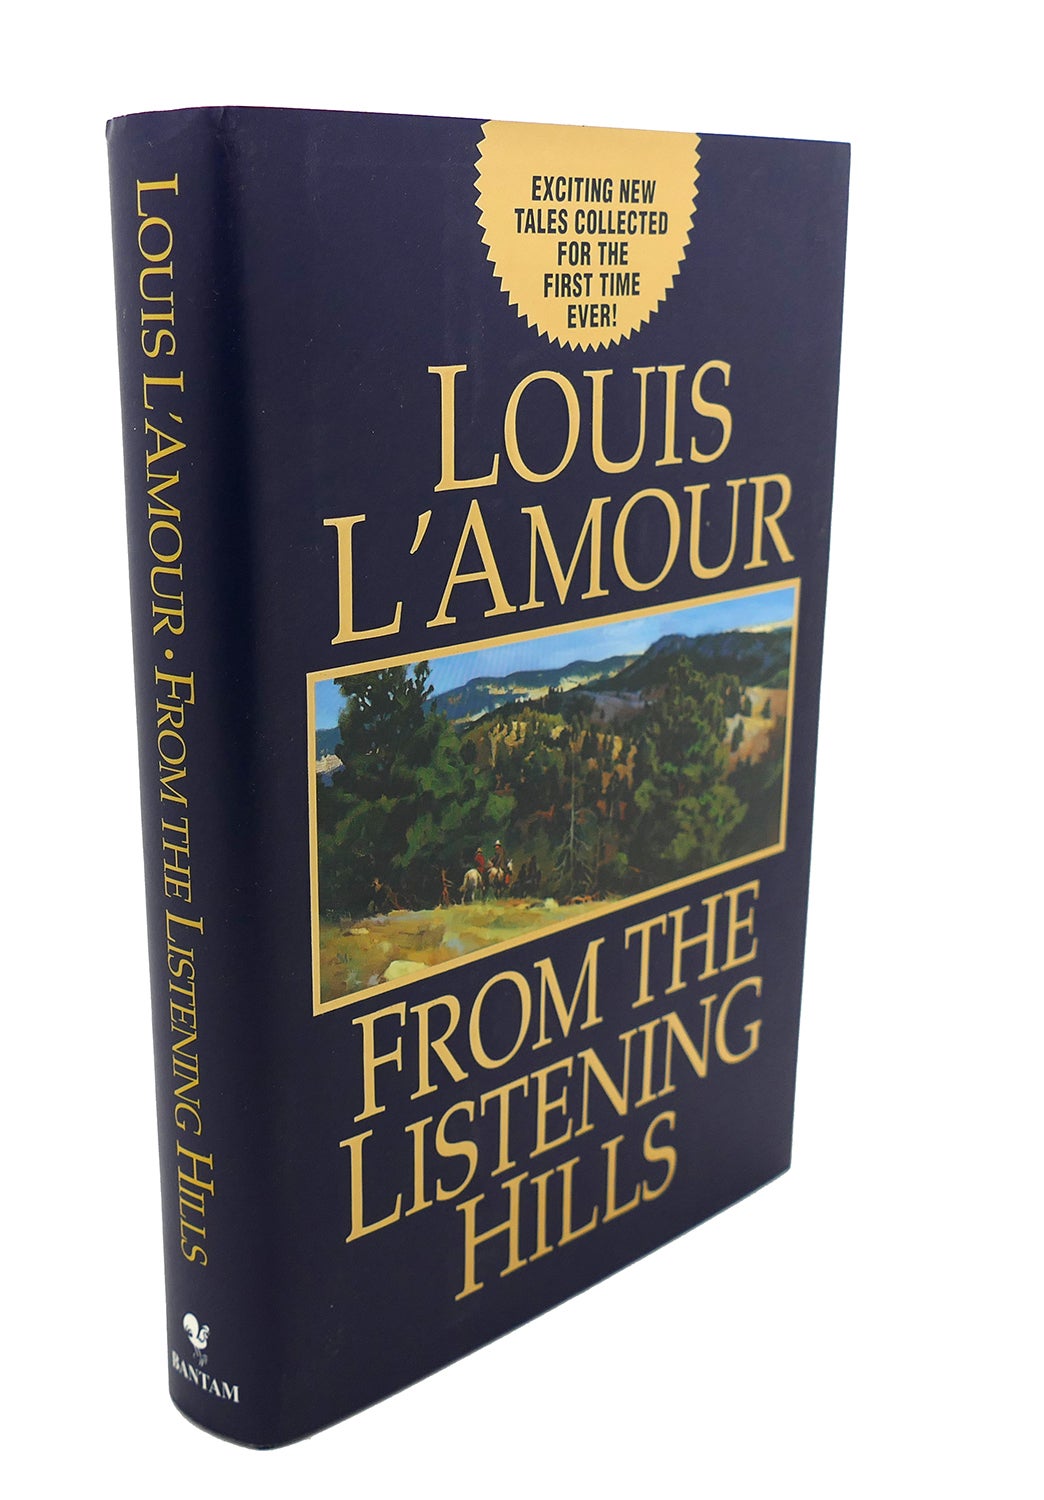 FROM THE LISTENING HILLS, Louis L'Amour